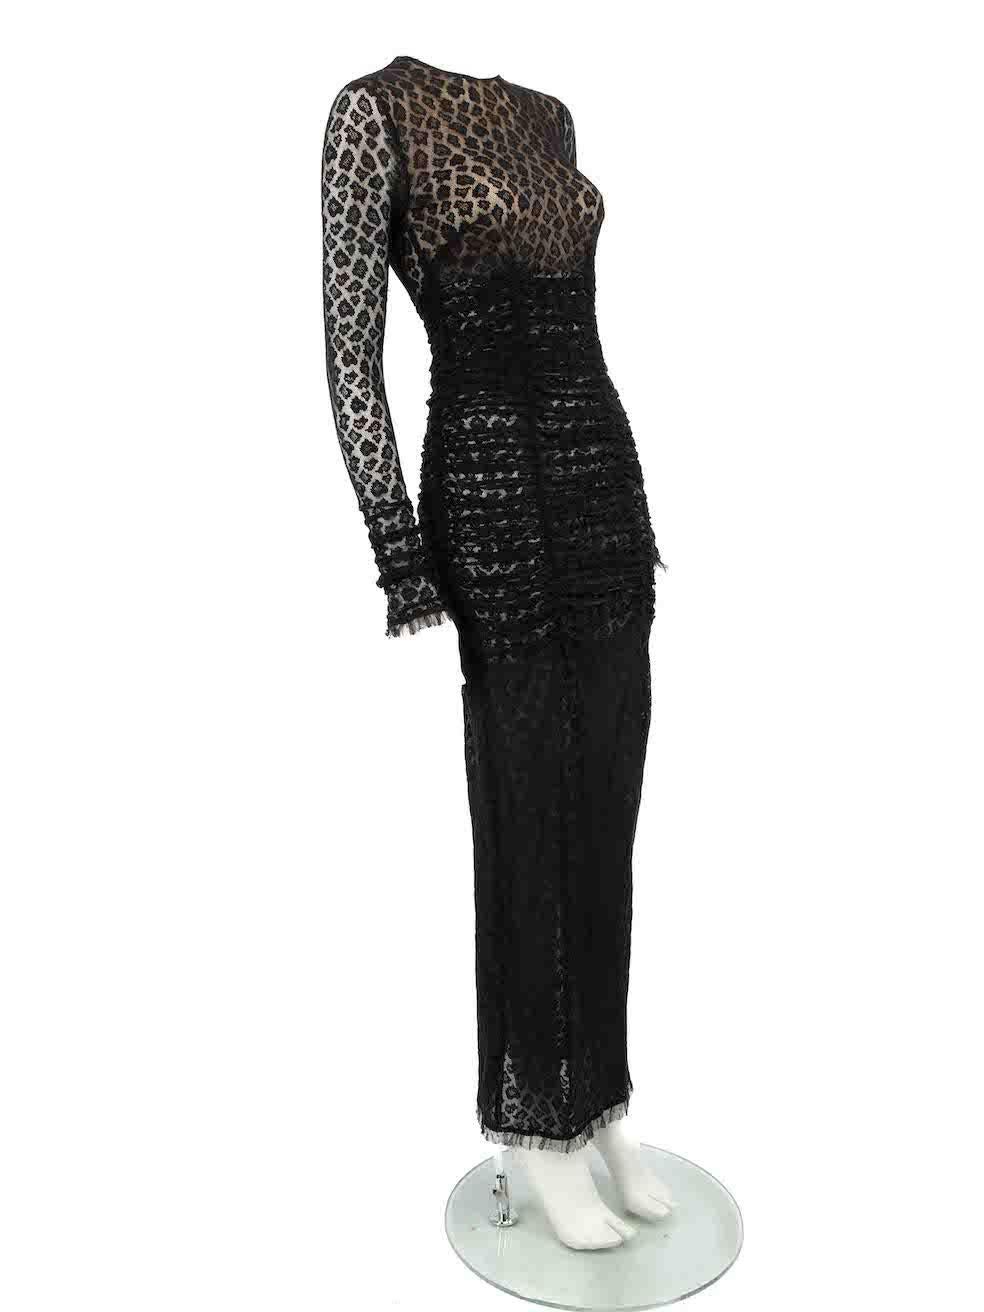 CONDITION is Very good. Hardly any visible wear to dress is evident. However, the size and composition label is missing on this used Alessandra Rich designer resale item.
 
 
 
 Details
 
 
 Black
 
 Lace
 
 Maxi dress
 
 Round neckline
 
 Leopard